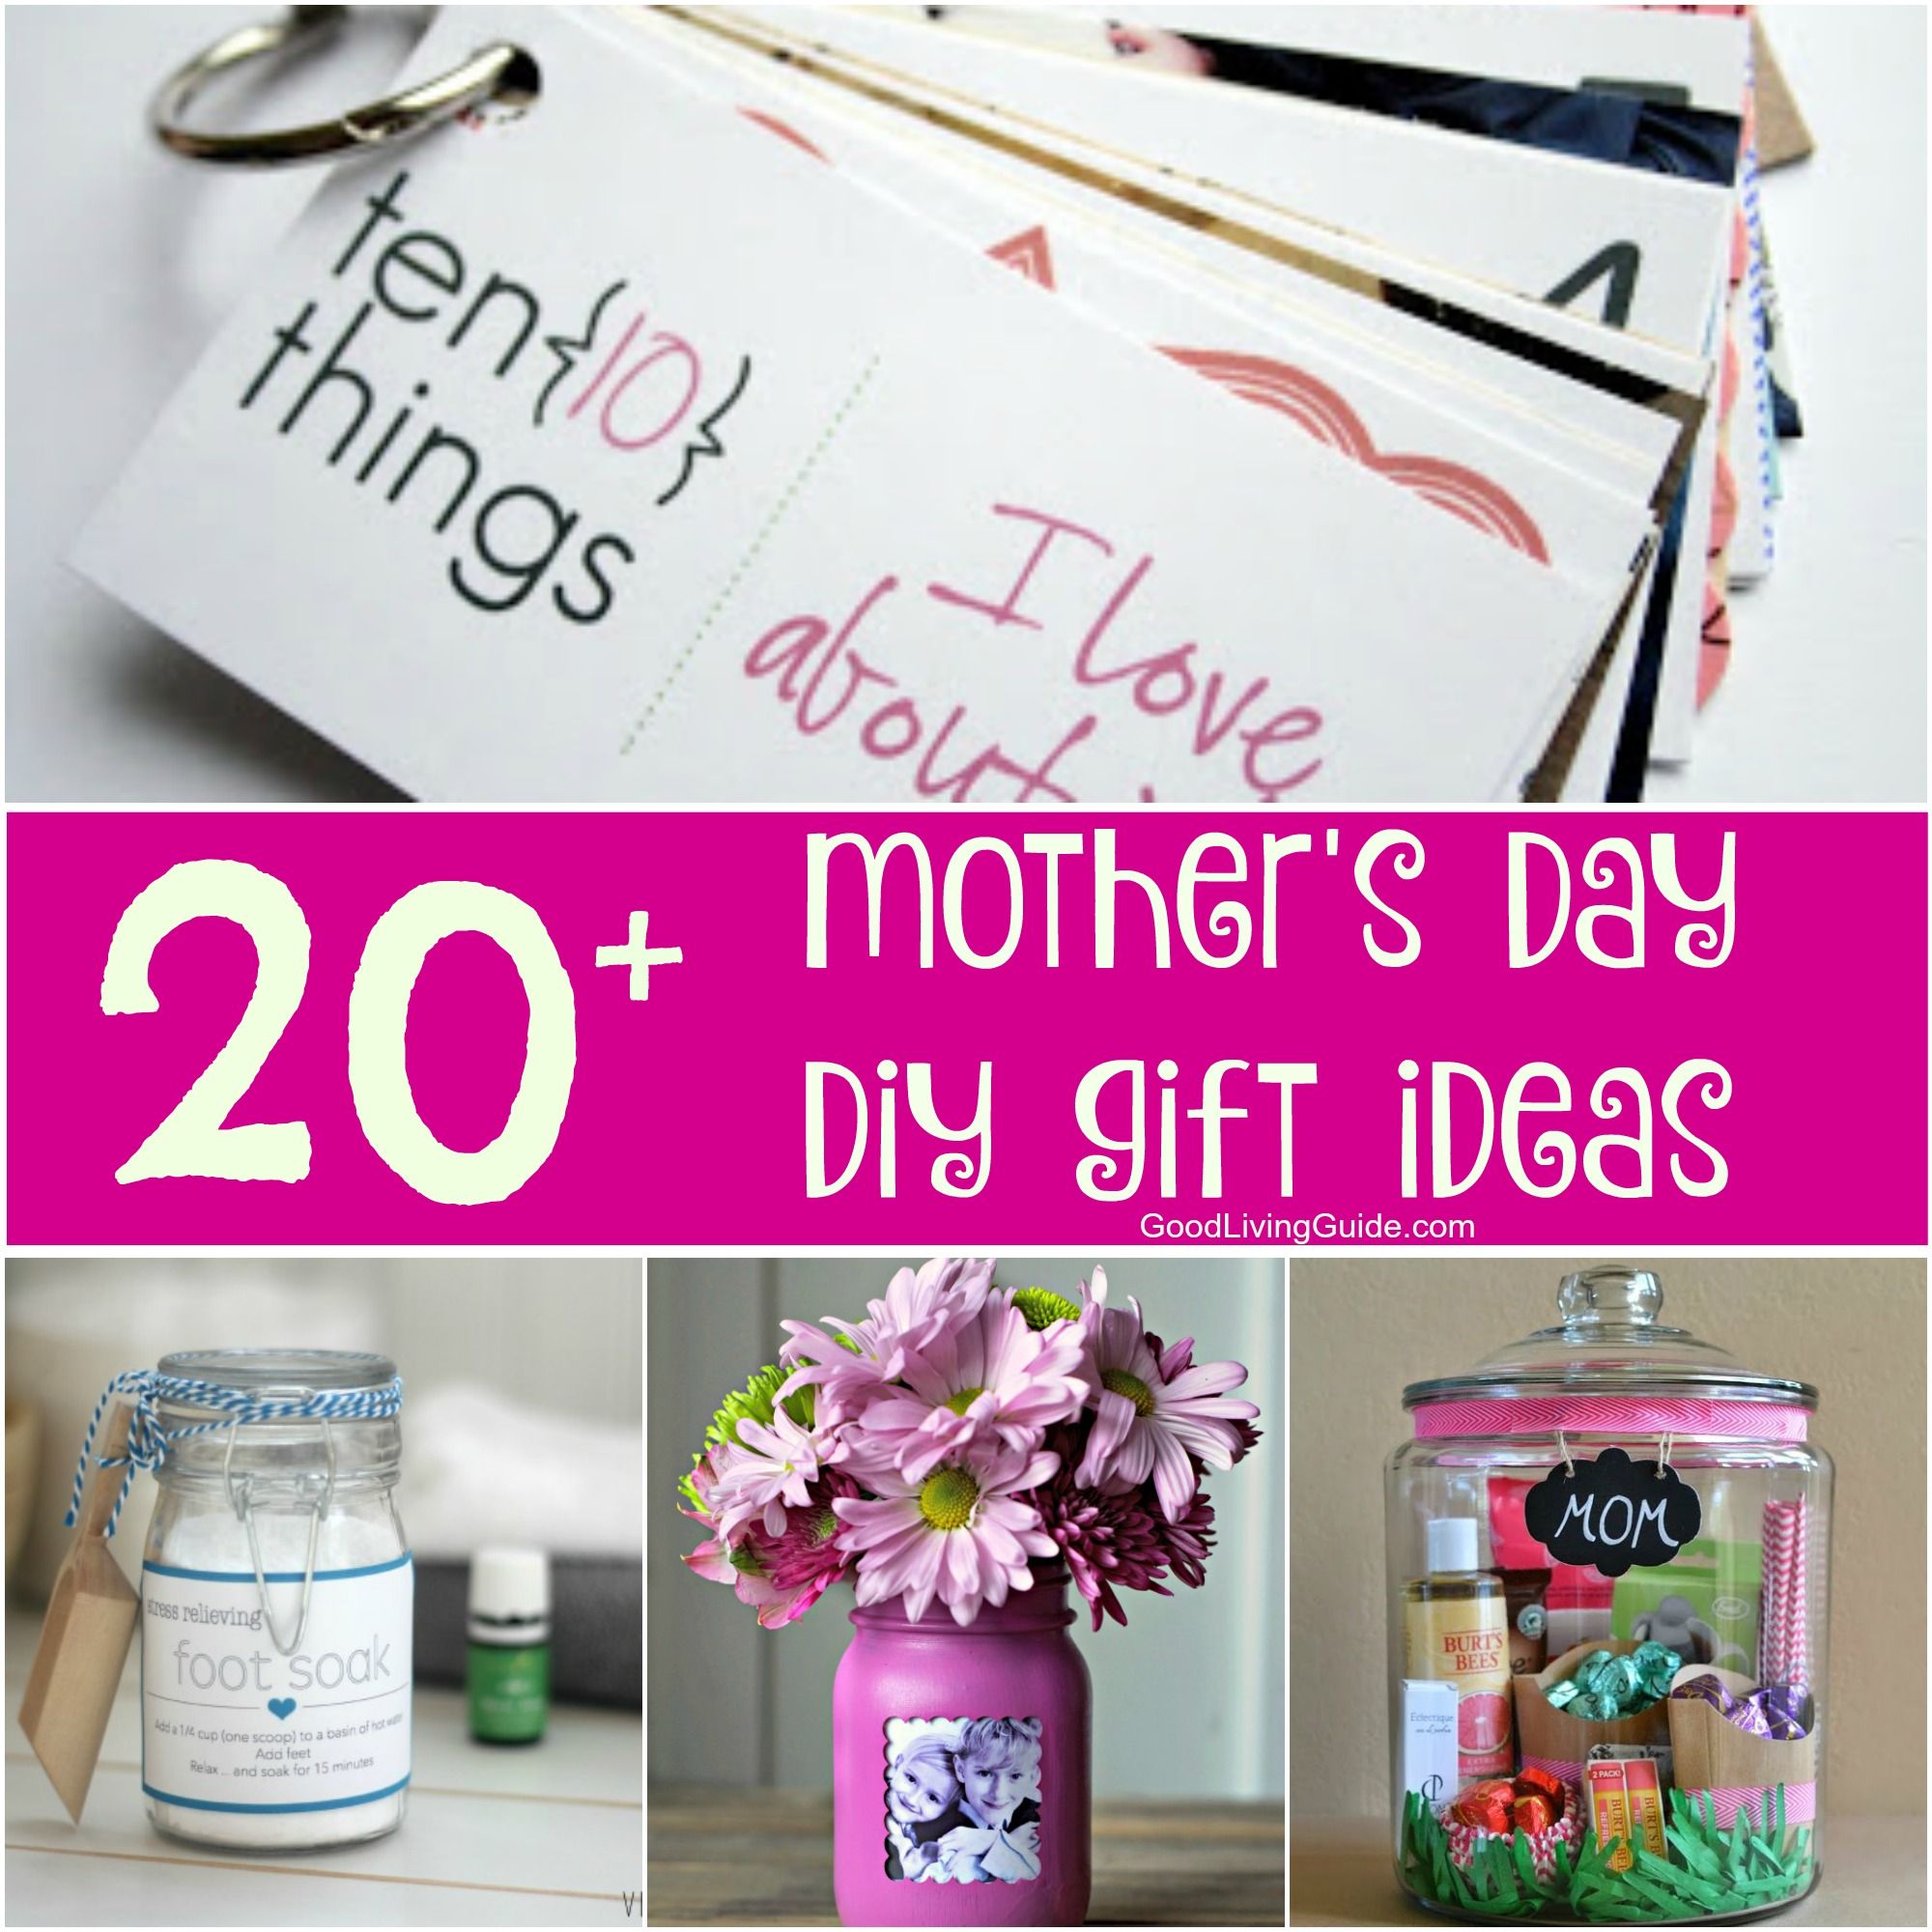 20+ Mother's Day DIY Gift Ideas - Good Living Guide